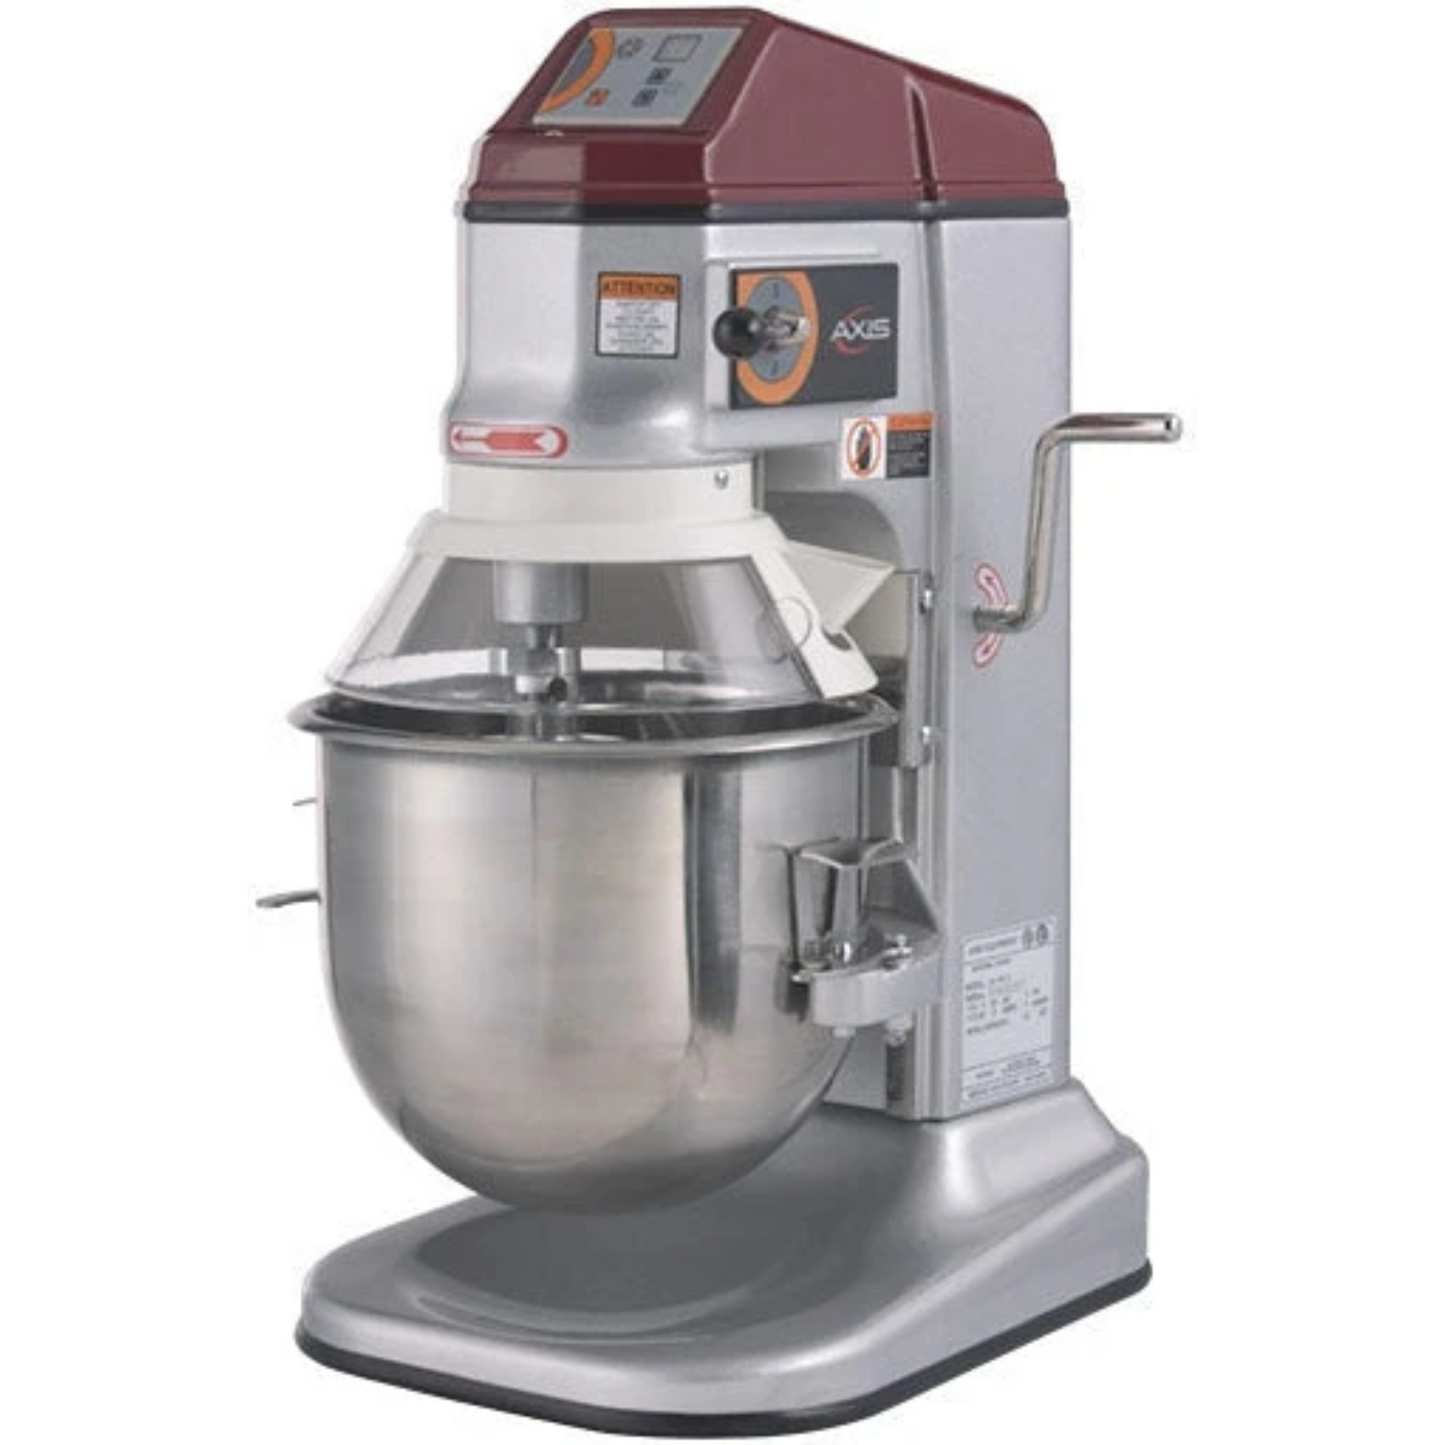 Axis AX-M12 Countertop 12 Quart Planetary Mixer with Timer, 3-Speed, 1/2 HP